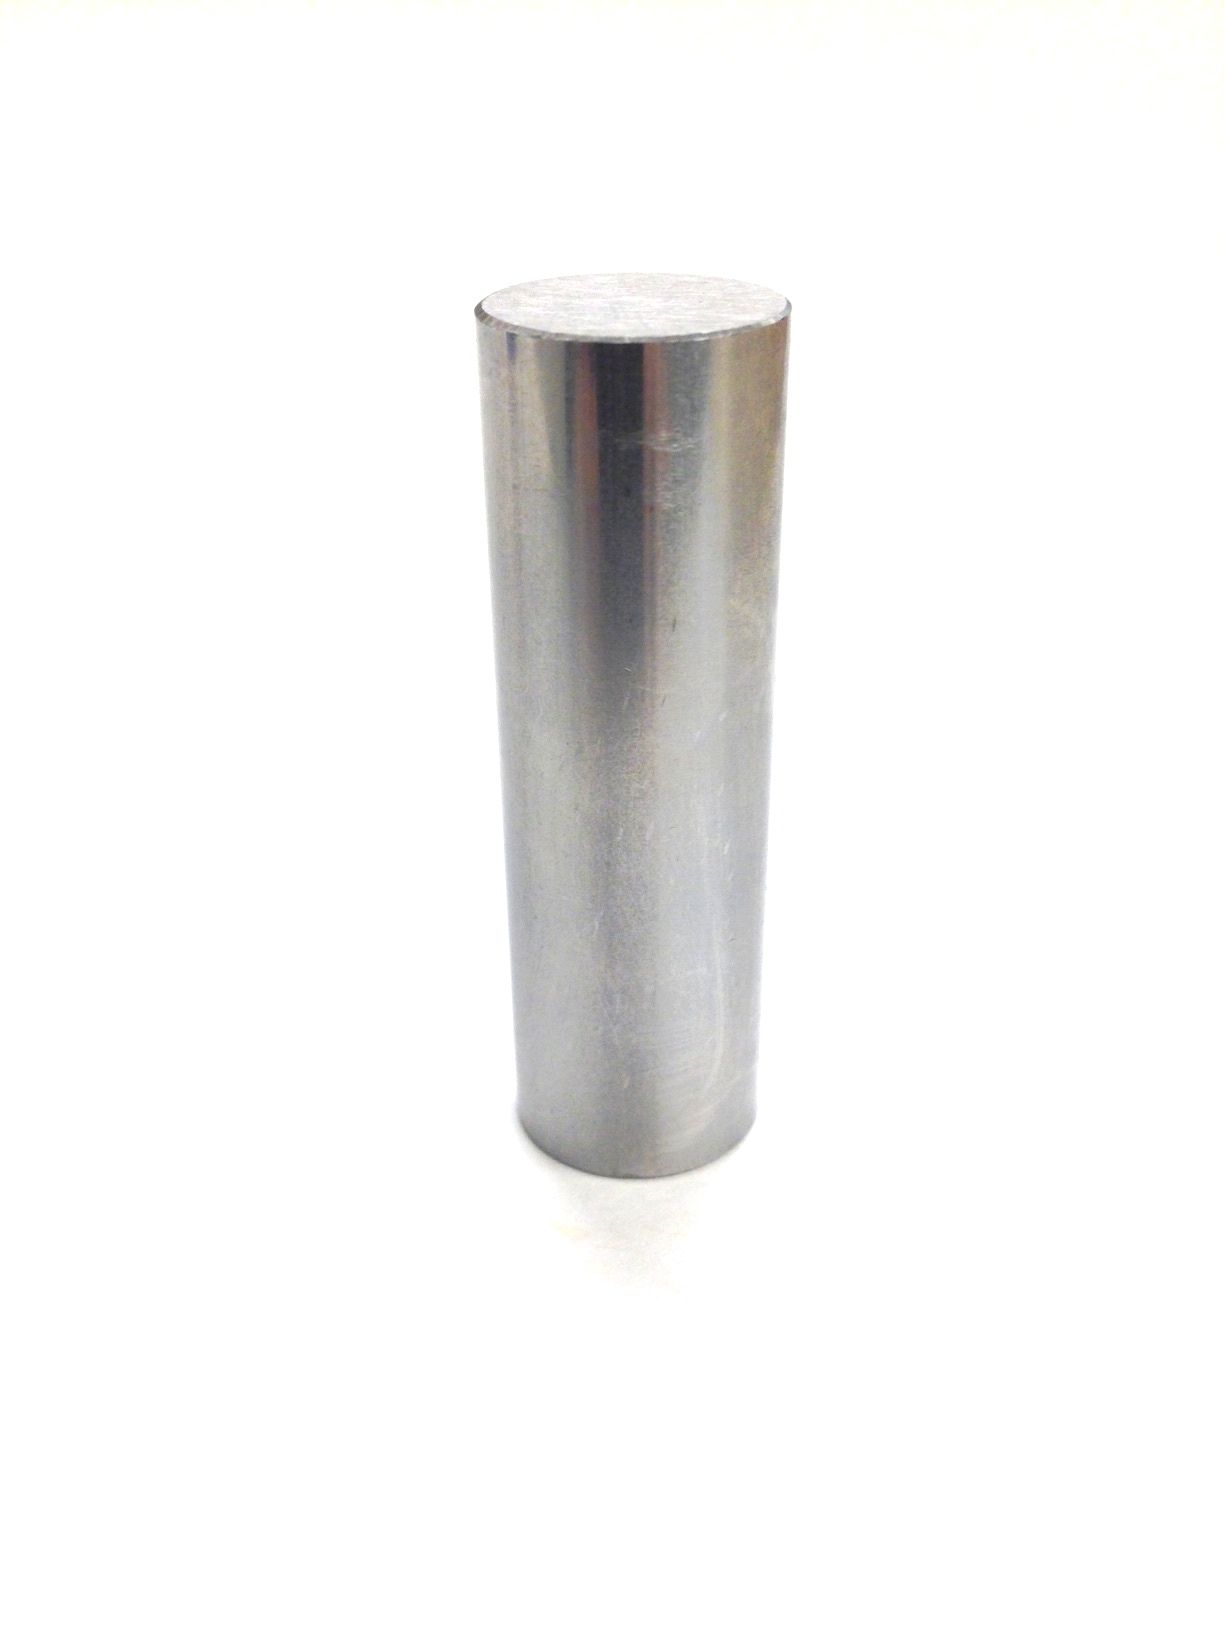 0.656 Replacement Pin Gage P-4 ( .0002) Tolerance (4103-0656)